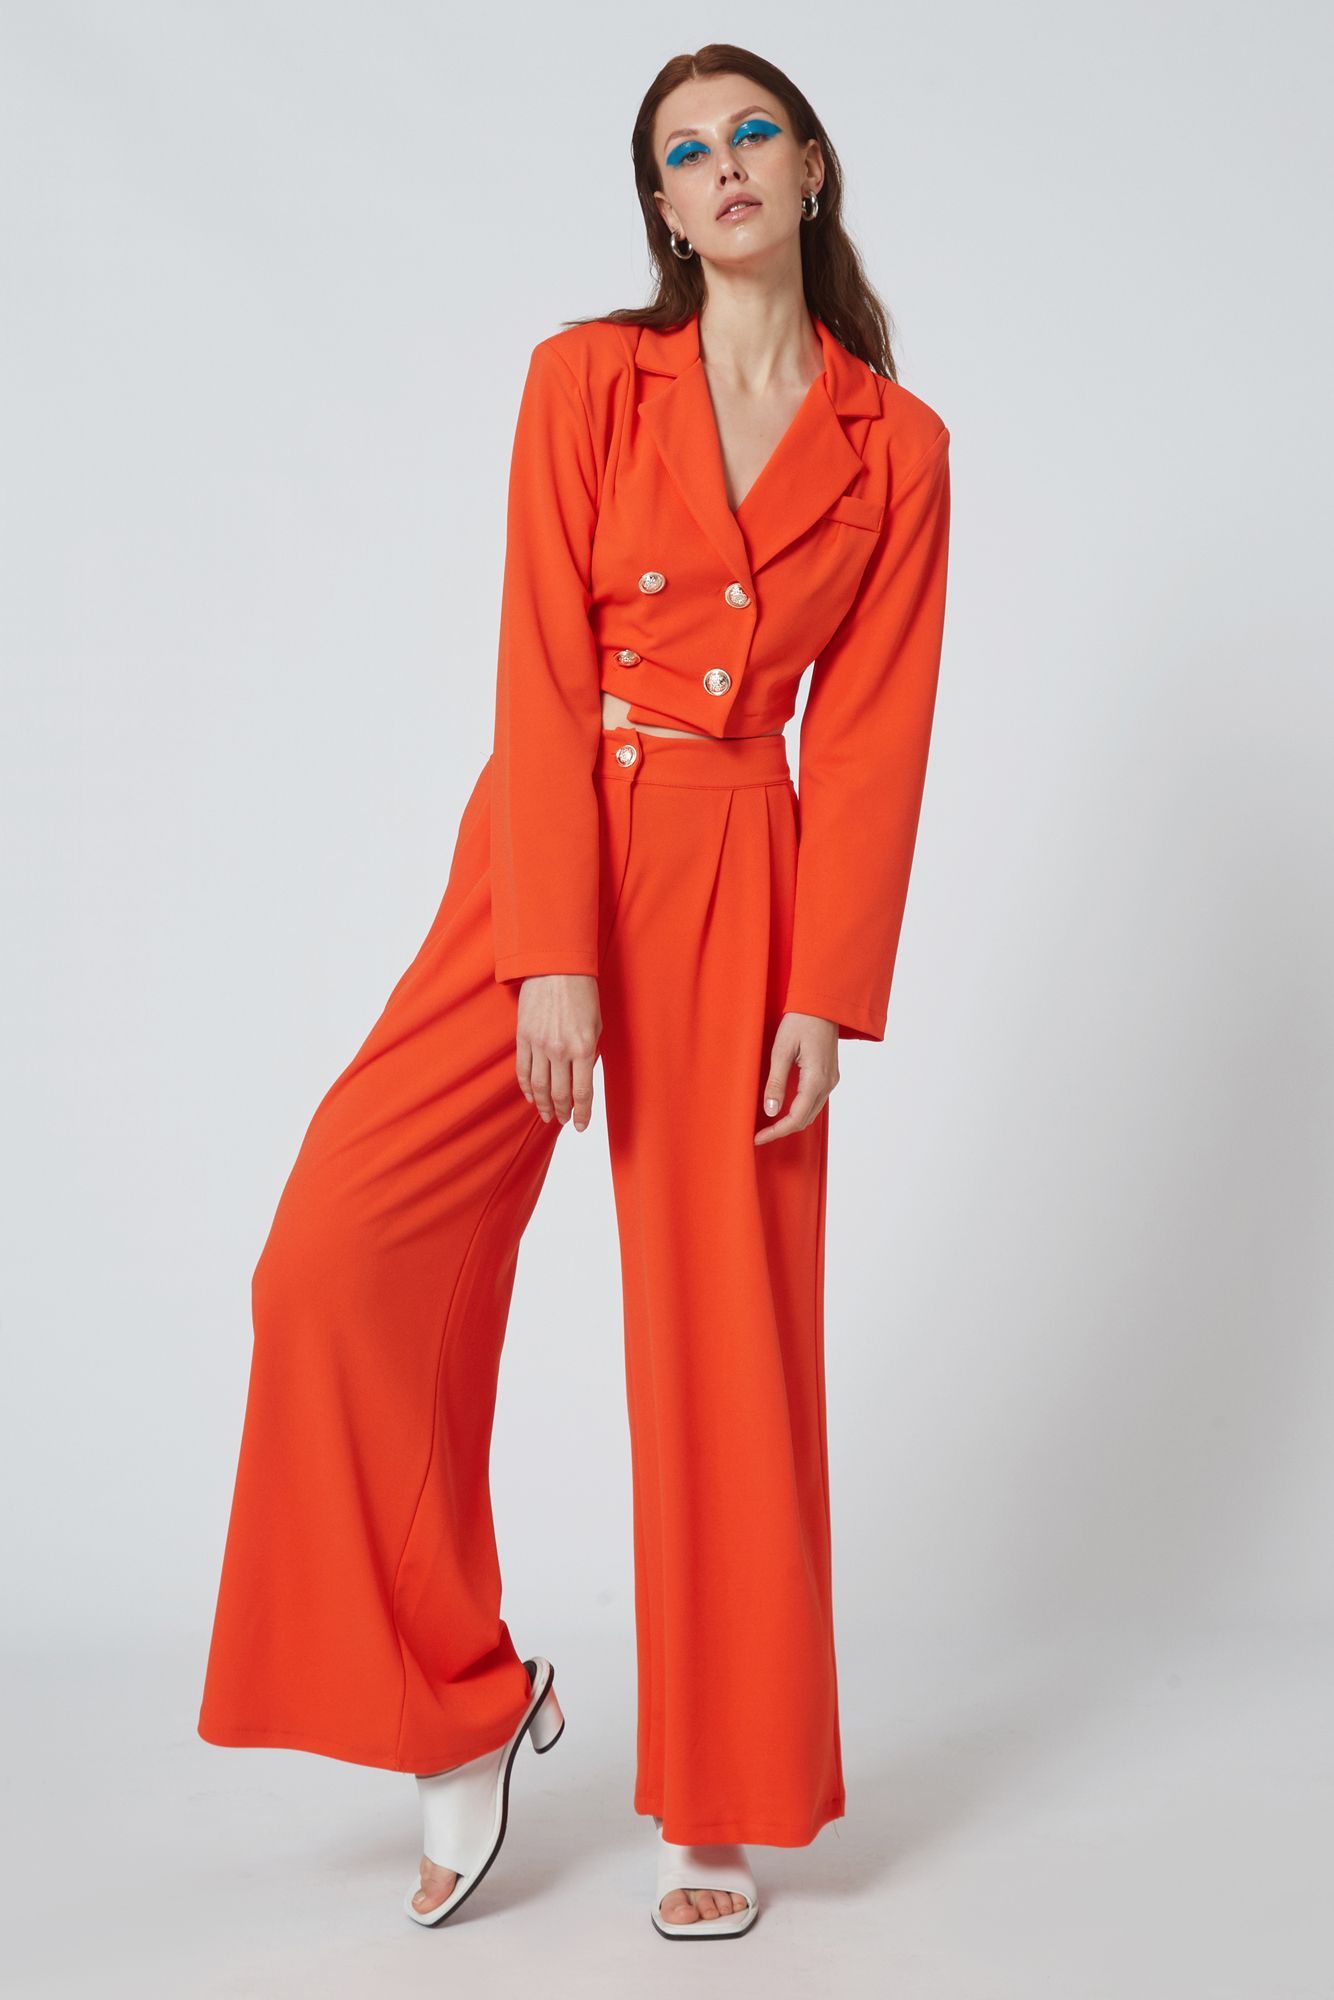 Wide leg trouser and suit co-ord in orange